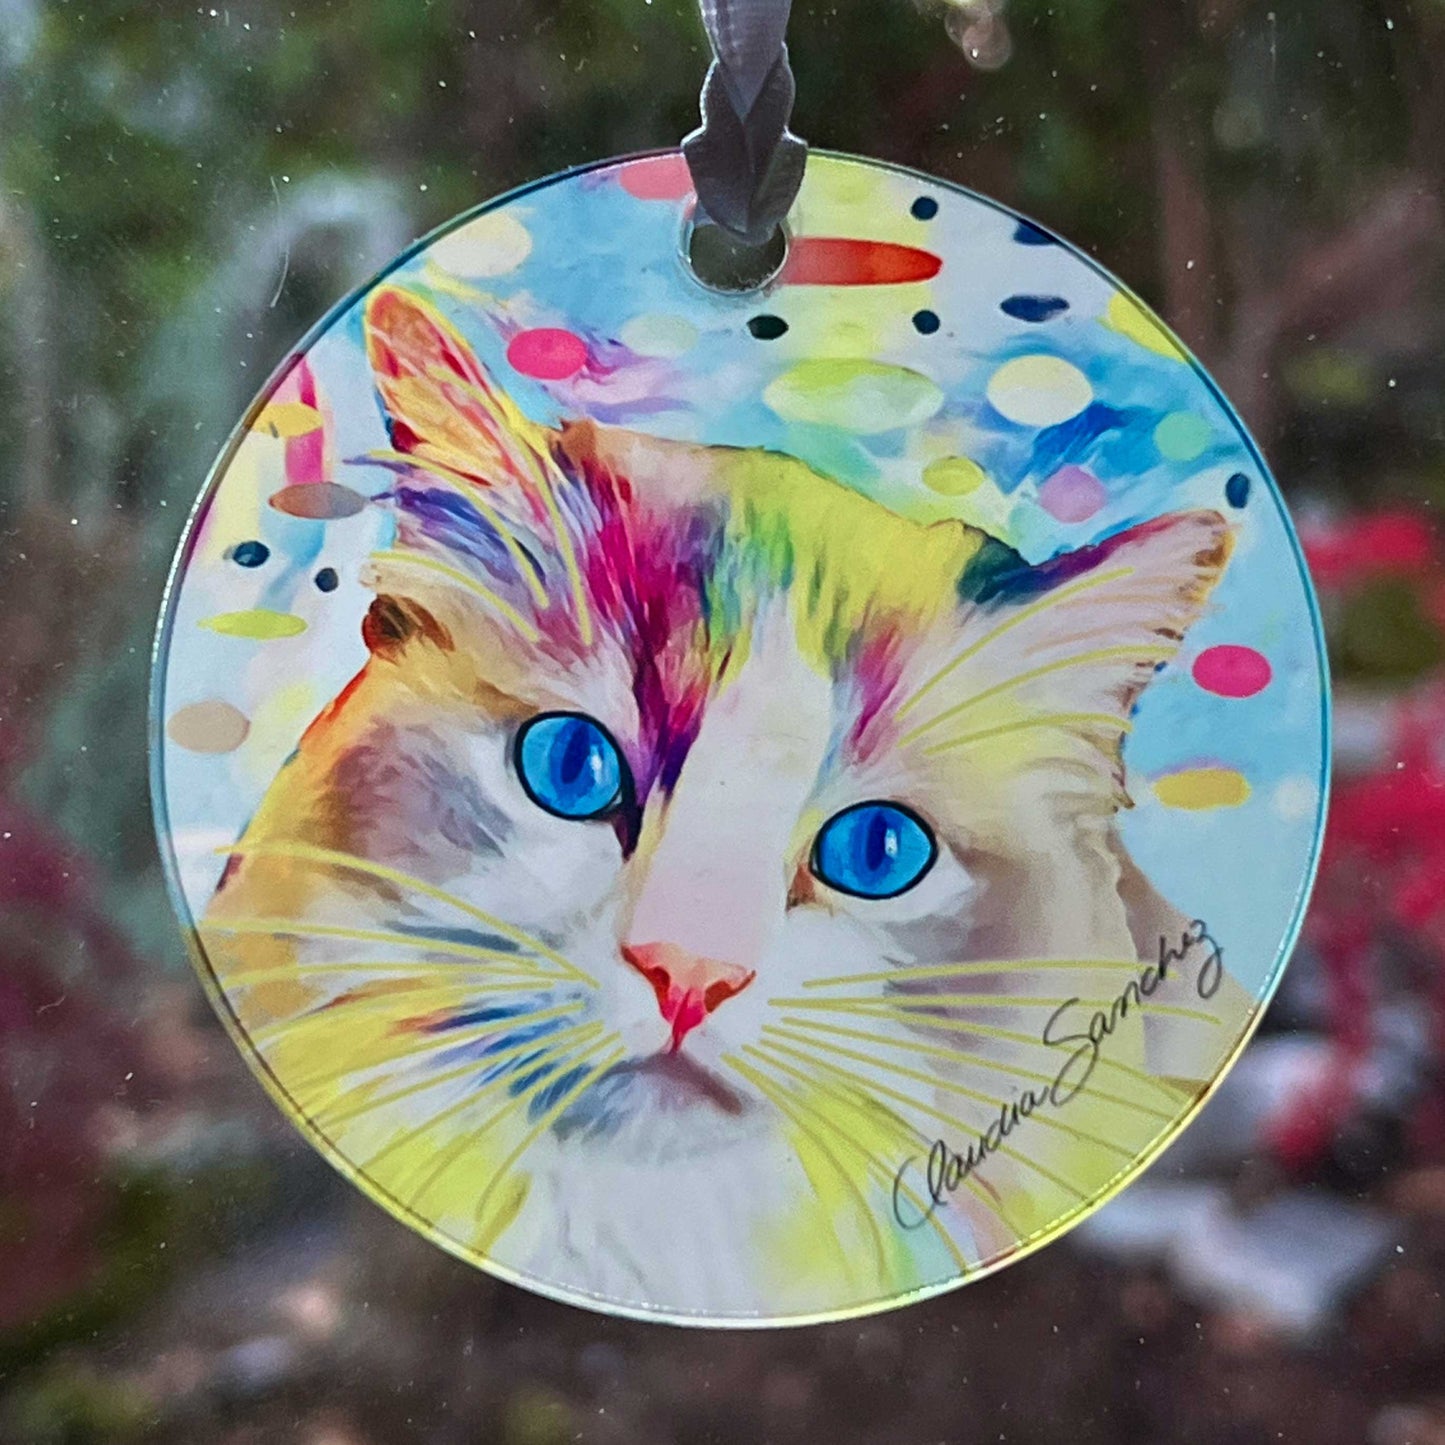 Gunner's Face in Space Acrylic Cat Art Ornament by Claudia Sanchez